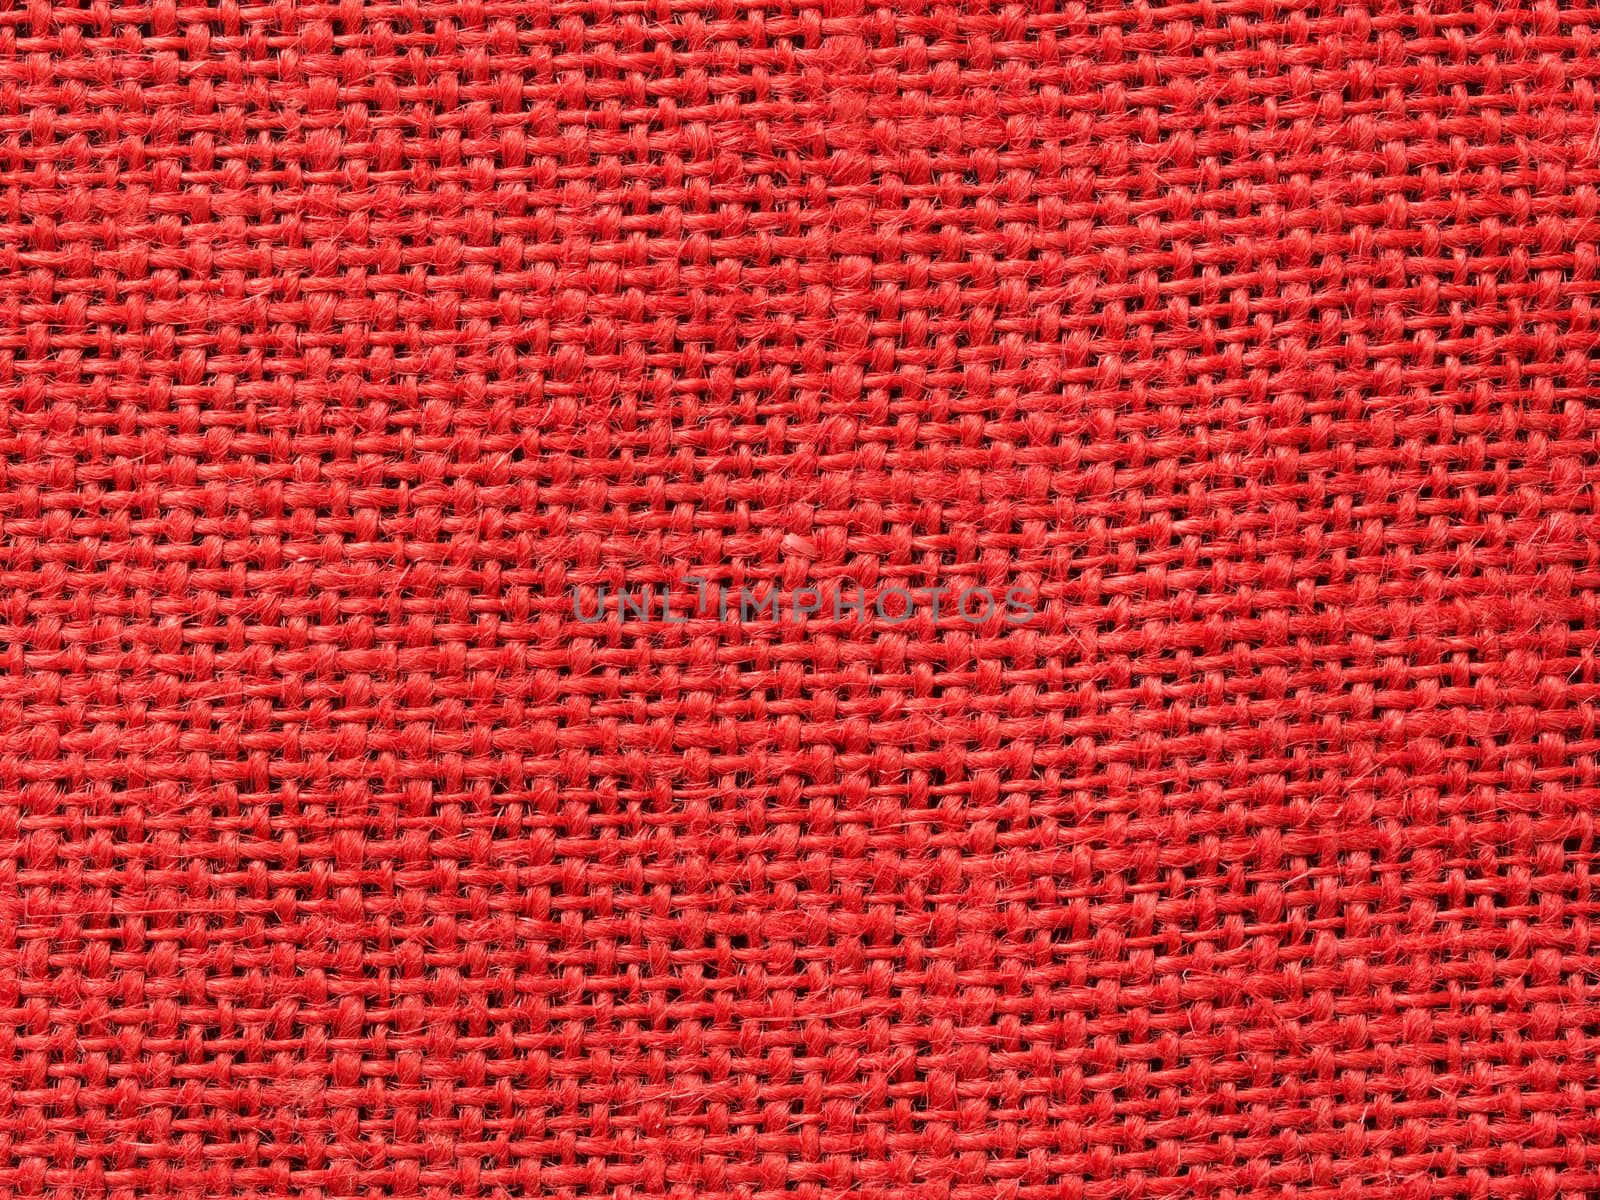 close up of red burlap fabric texture background